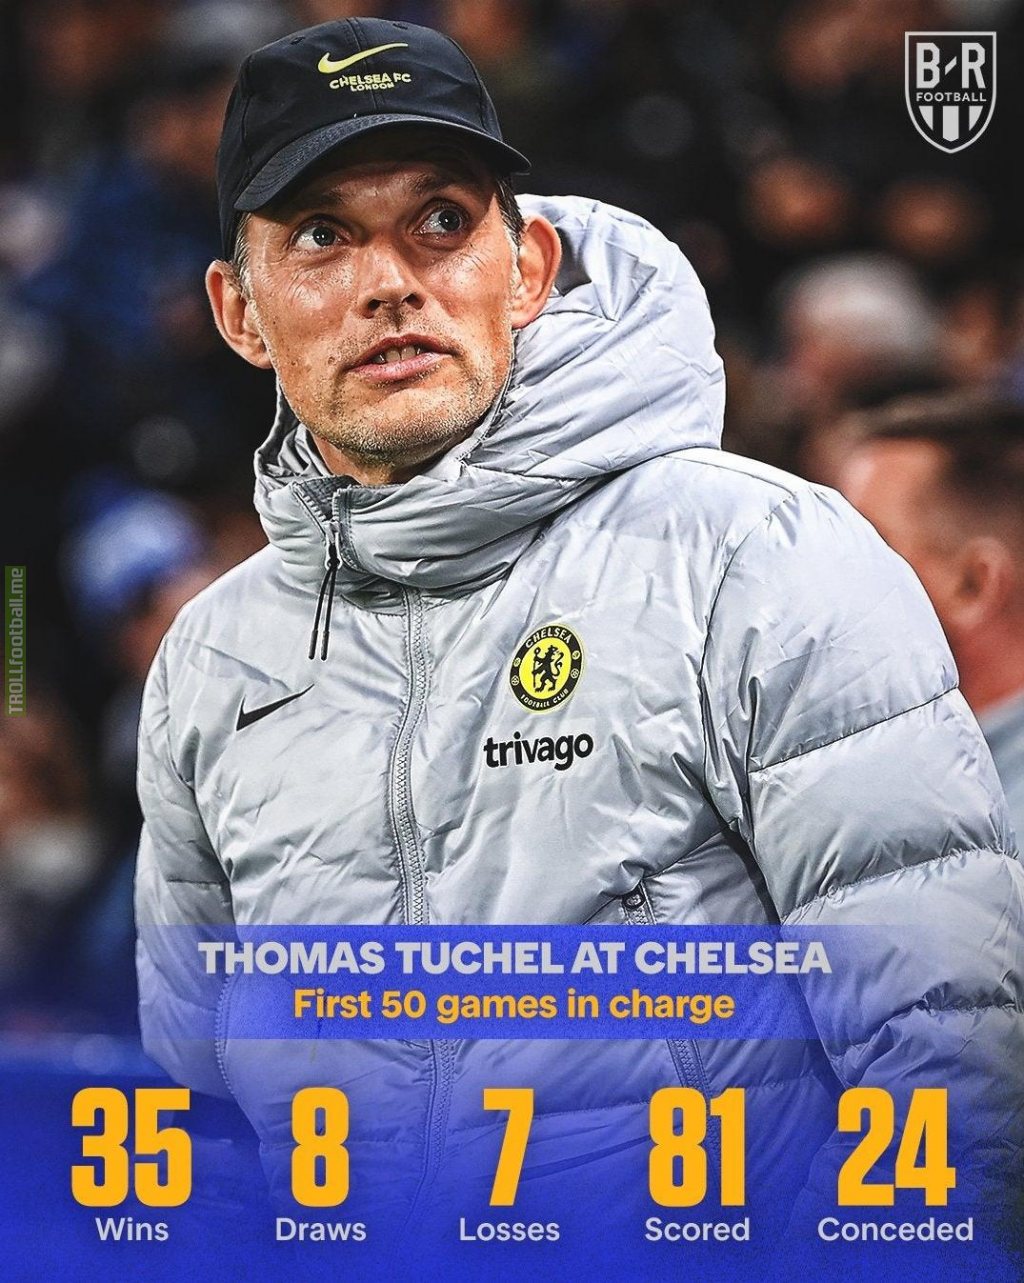 First 50 games in charge for Thomas Tuchel